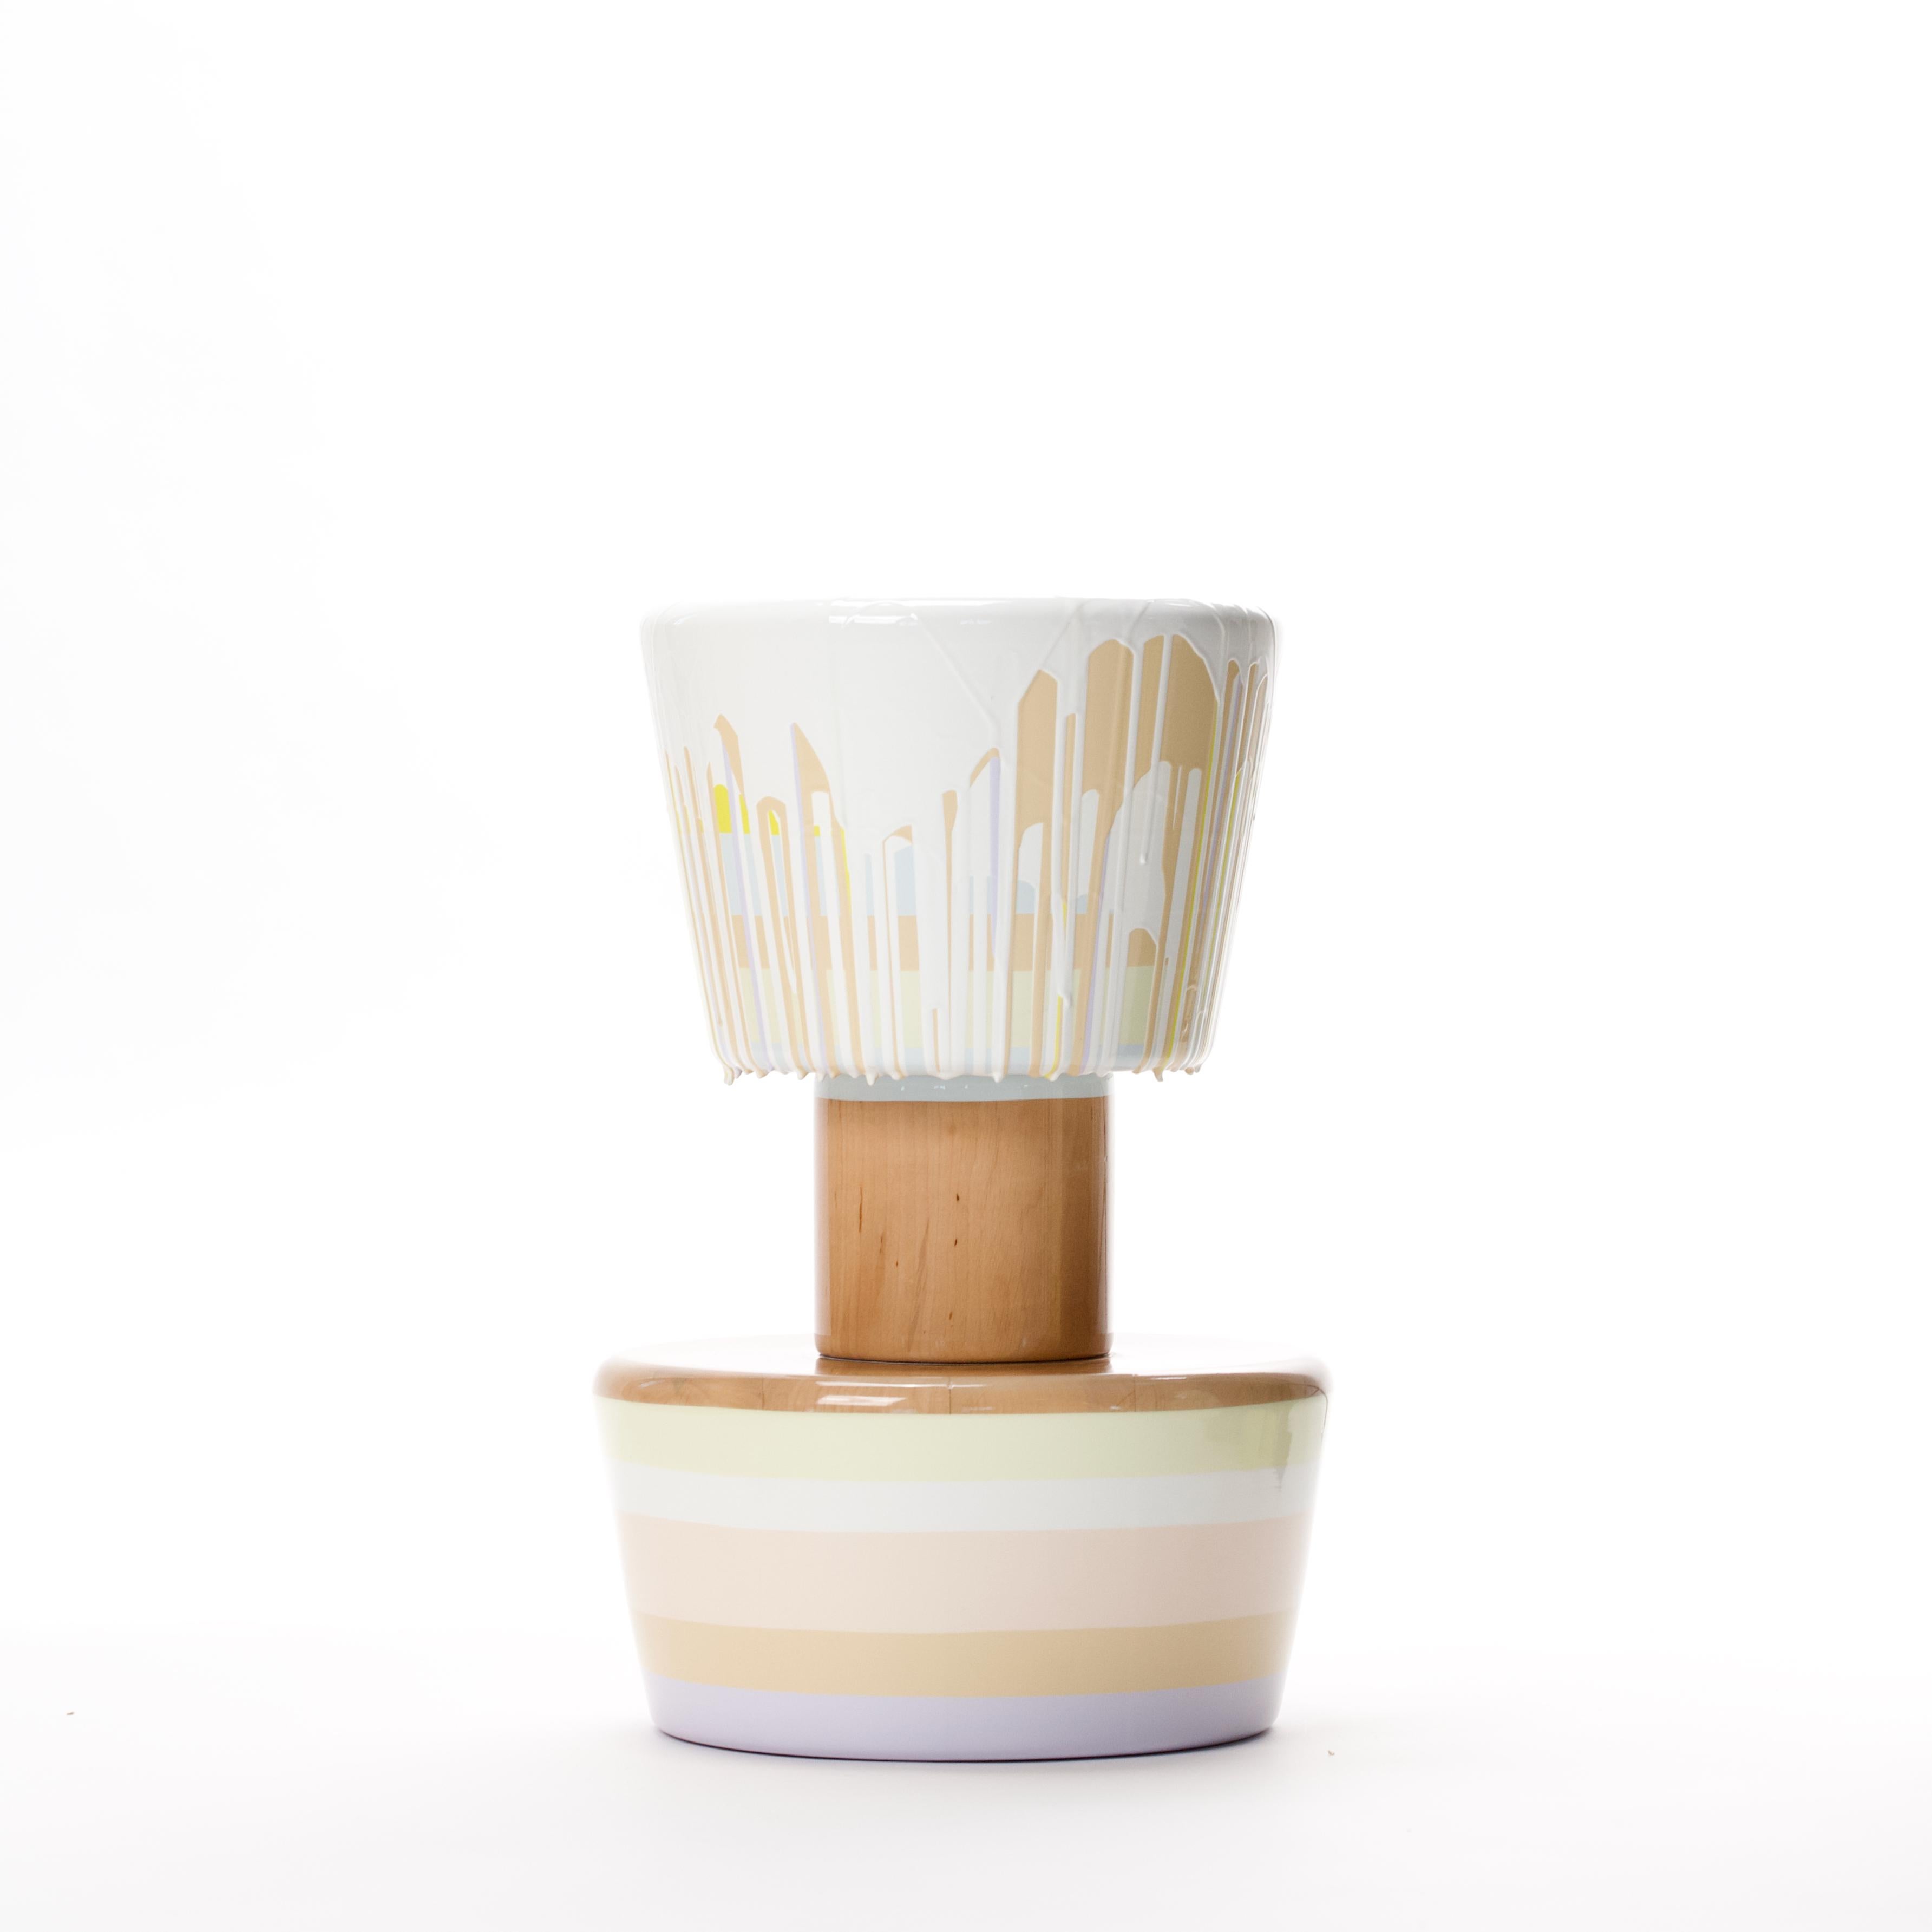 LOLO is a family of objects, stools or side tables all of which are alike, yet different - like you and me. An abstraction about diversification.
THIS LOLO is a special edition and originally a part of a larger installation
where dining table HAPPY